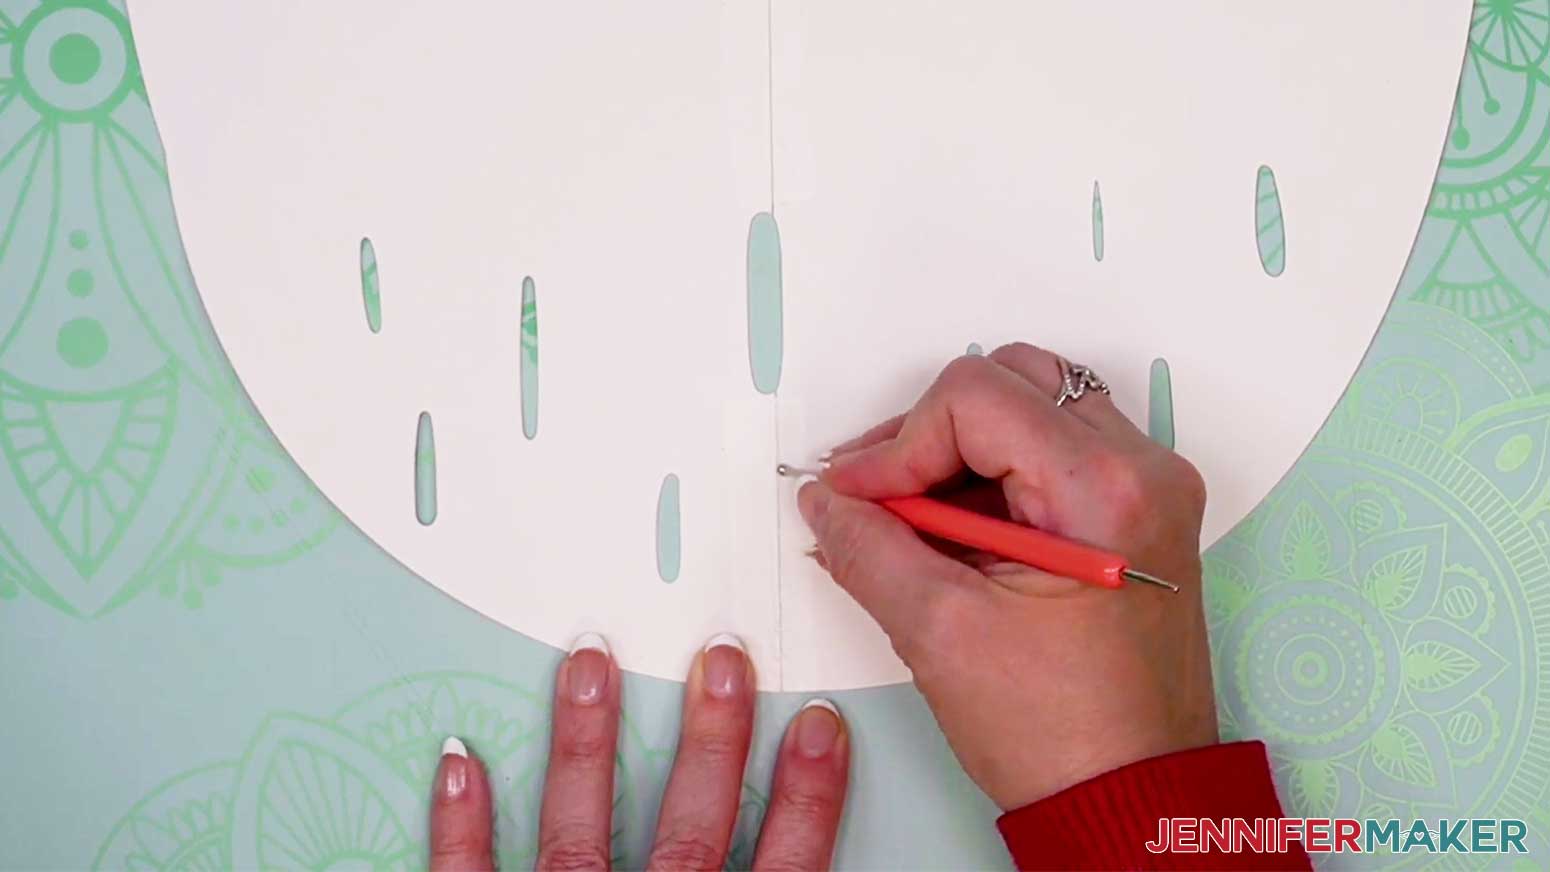 Using a burnishing tool to burnish the seams of the cardstock for the DIY Cut Out Character.